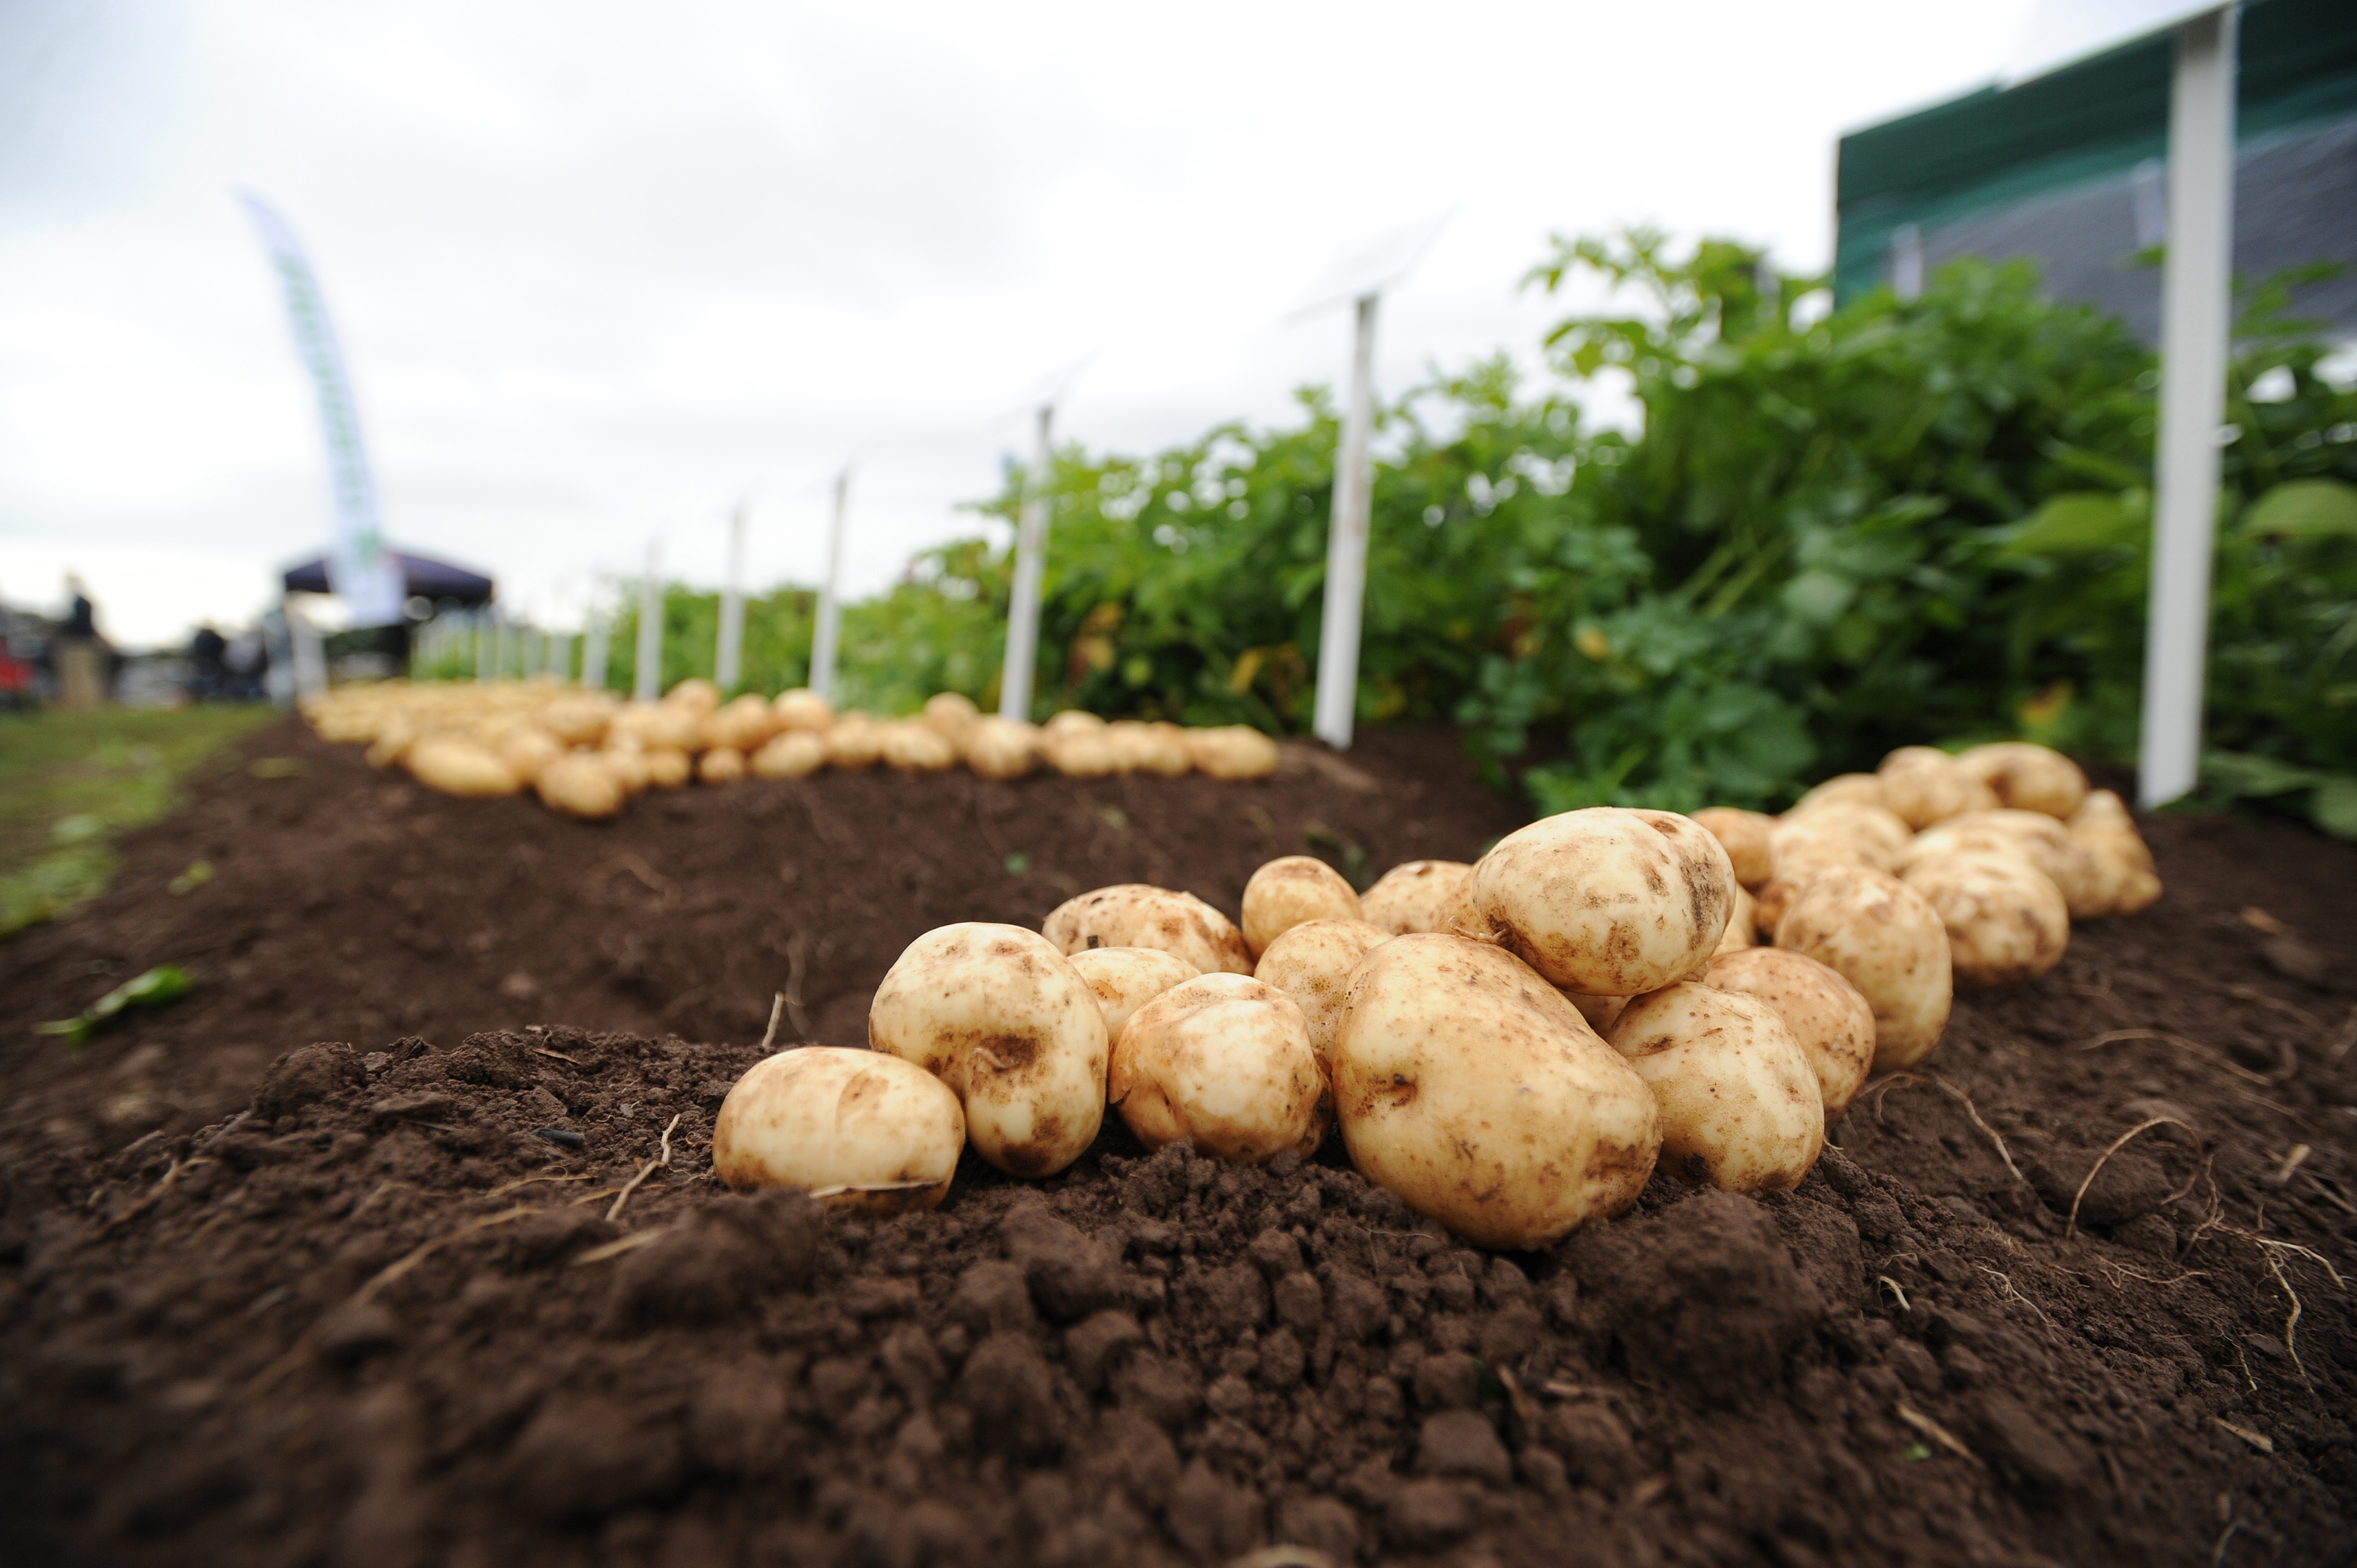 The Farmcare potato business at Carnoustie has been bought by Morrisons.